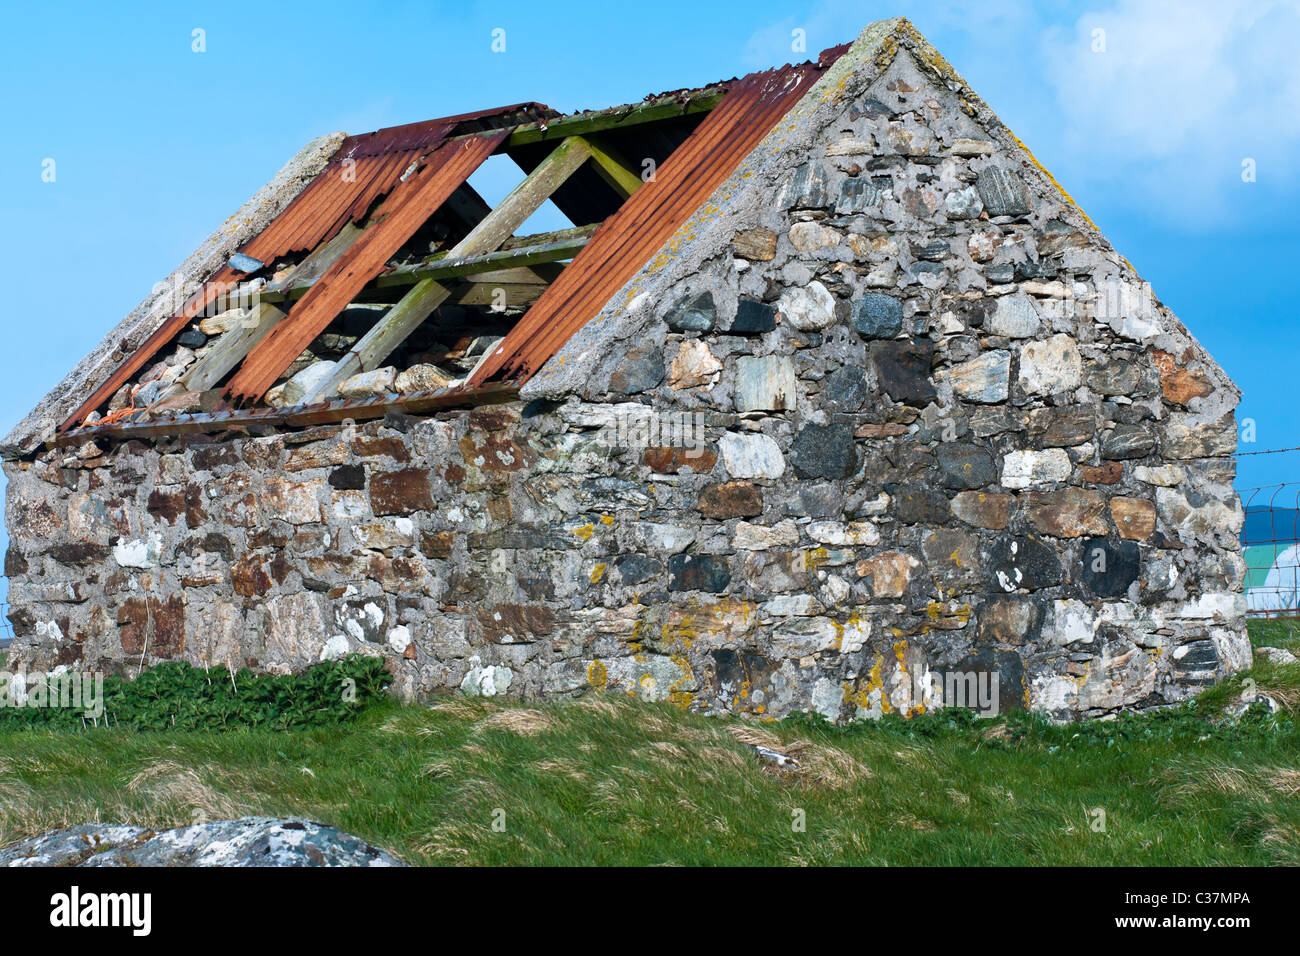 Building, Byre, Barn, Abandoned Stock Photo